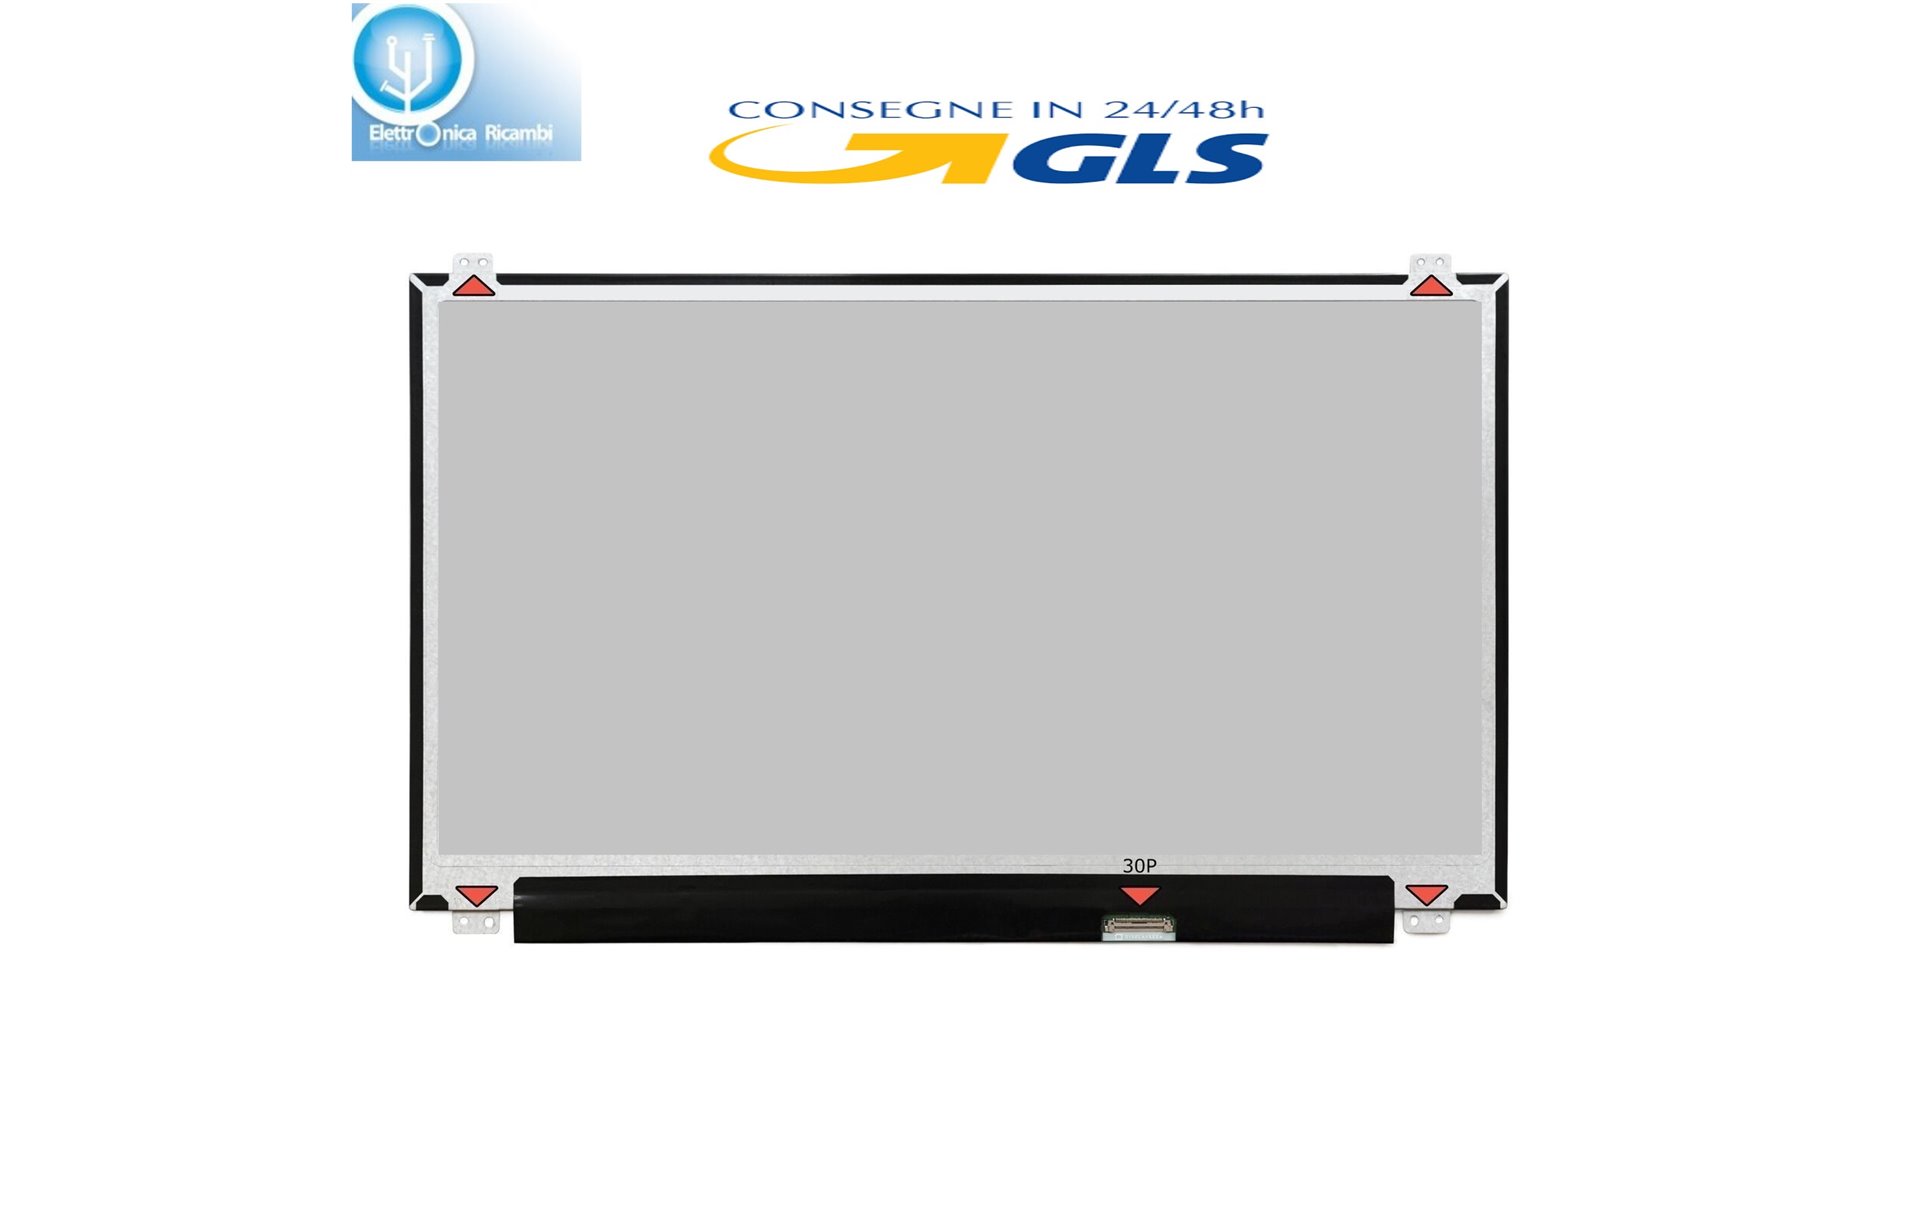 Display LCD  Schermo Acer KL.1560D.020
15,6 LED 1366X768 30 PIN